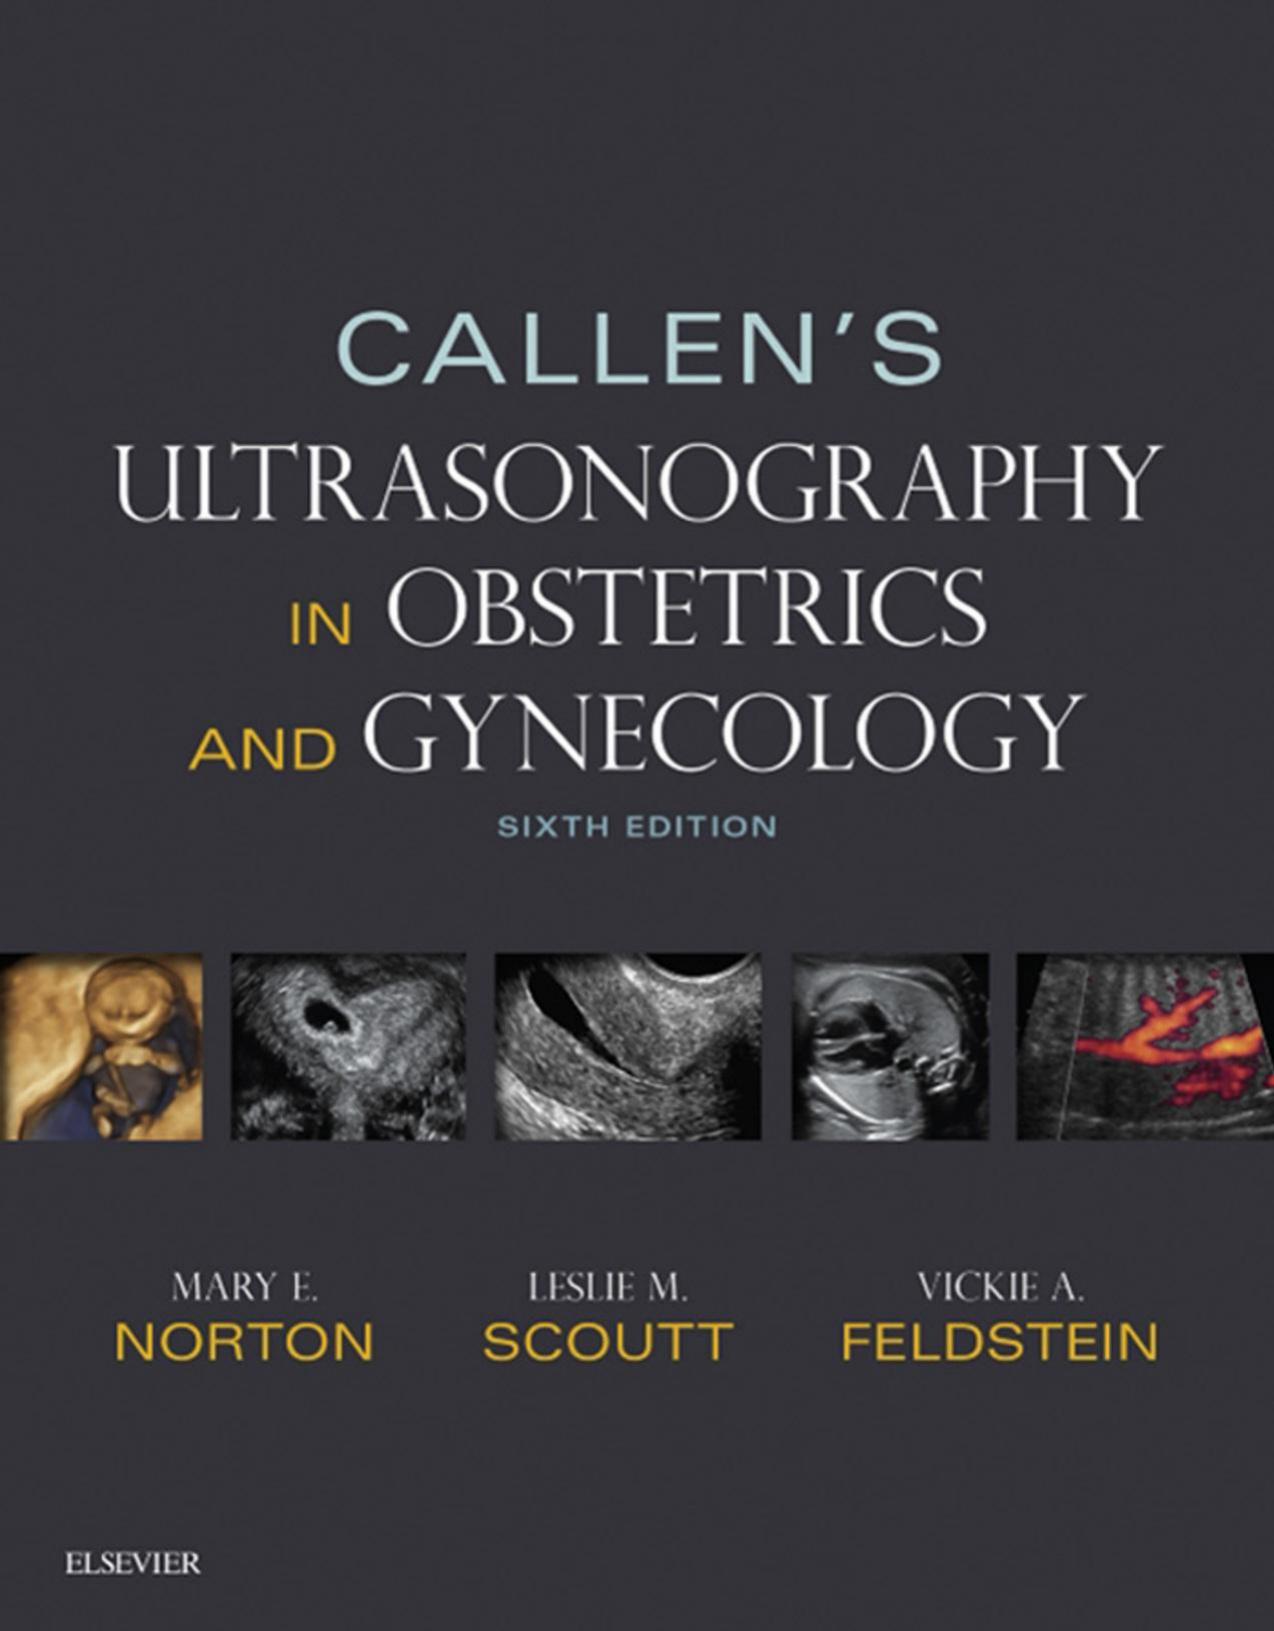 Callen's Ultrasonography in Obstetrics and Gynecology by Norton Mary E